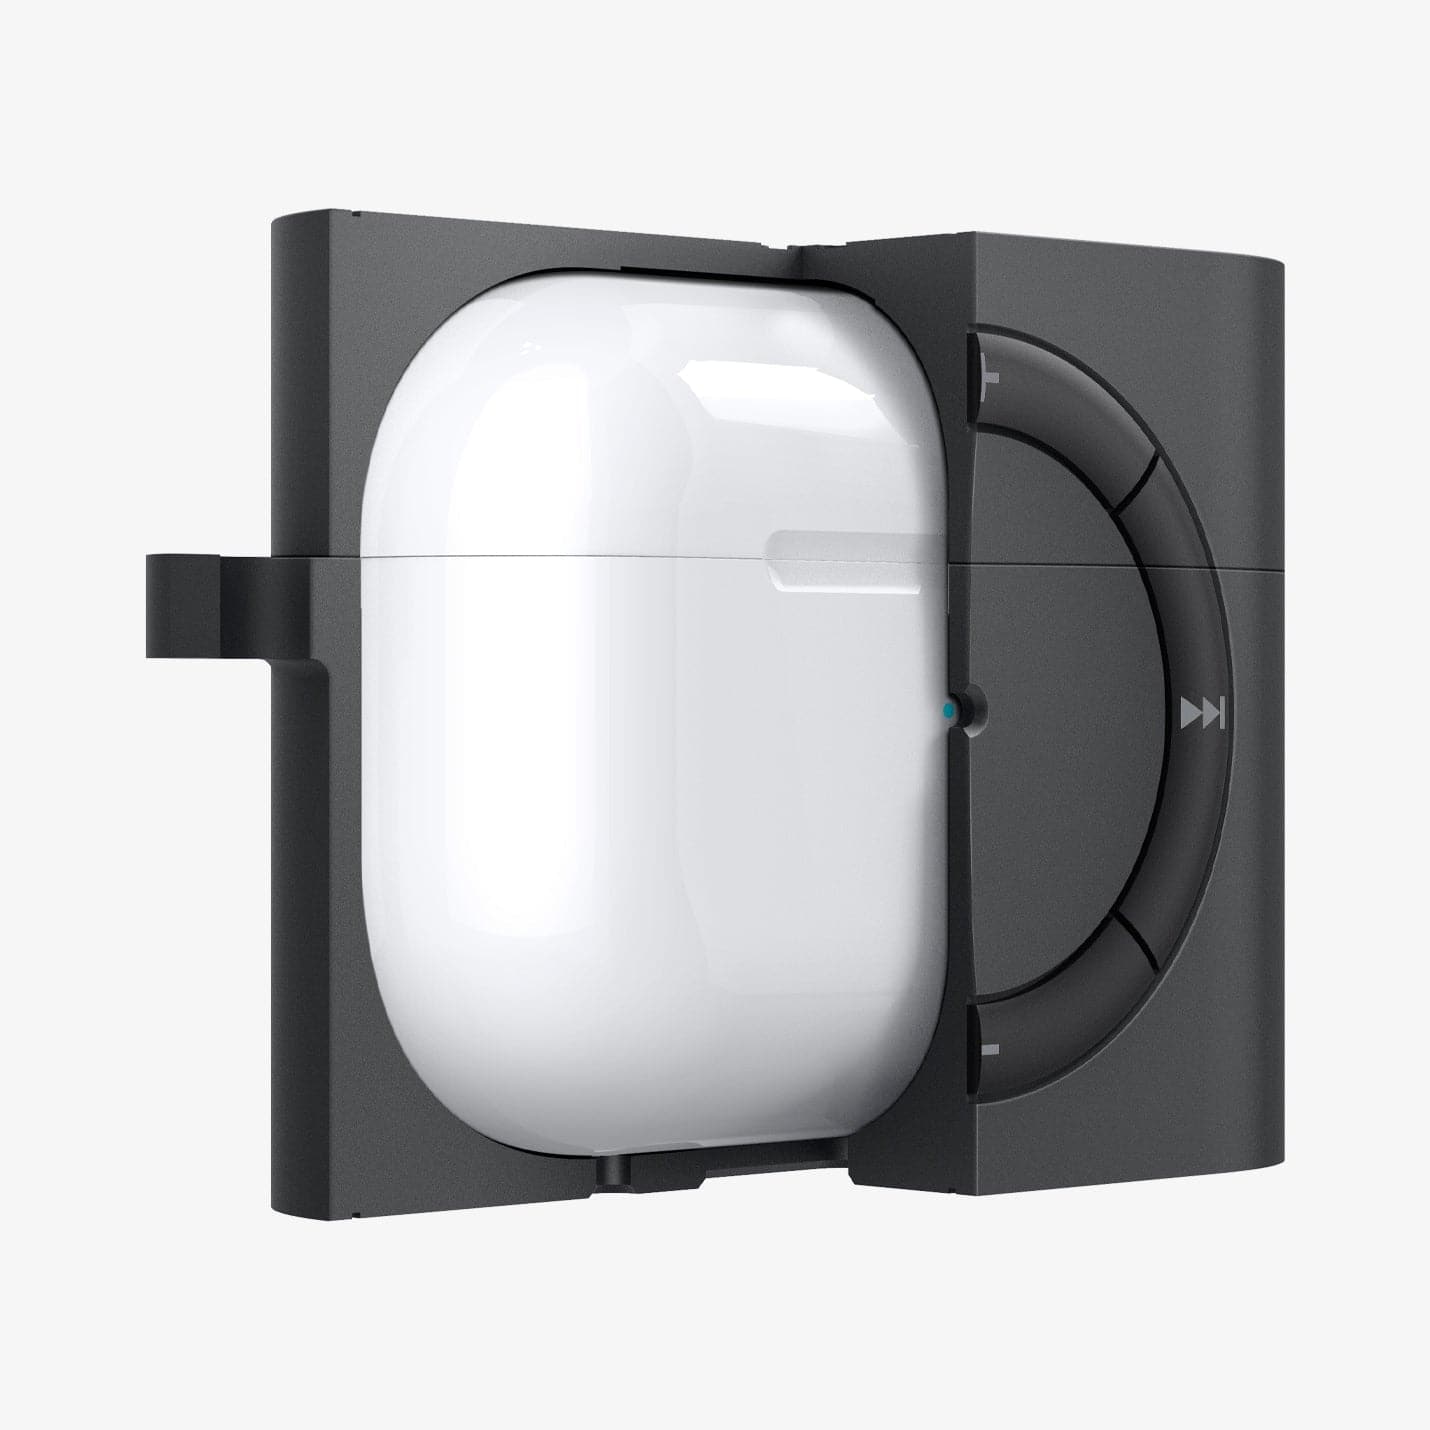 ACS05486 - Apple AirPods Pro 2 Case Classic Shuffle in charcoal showing the front with case cut half open